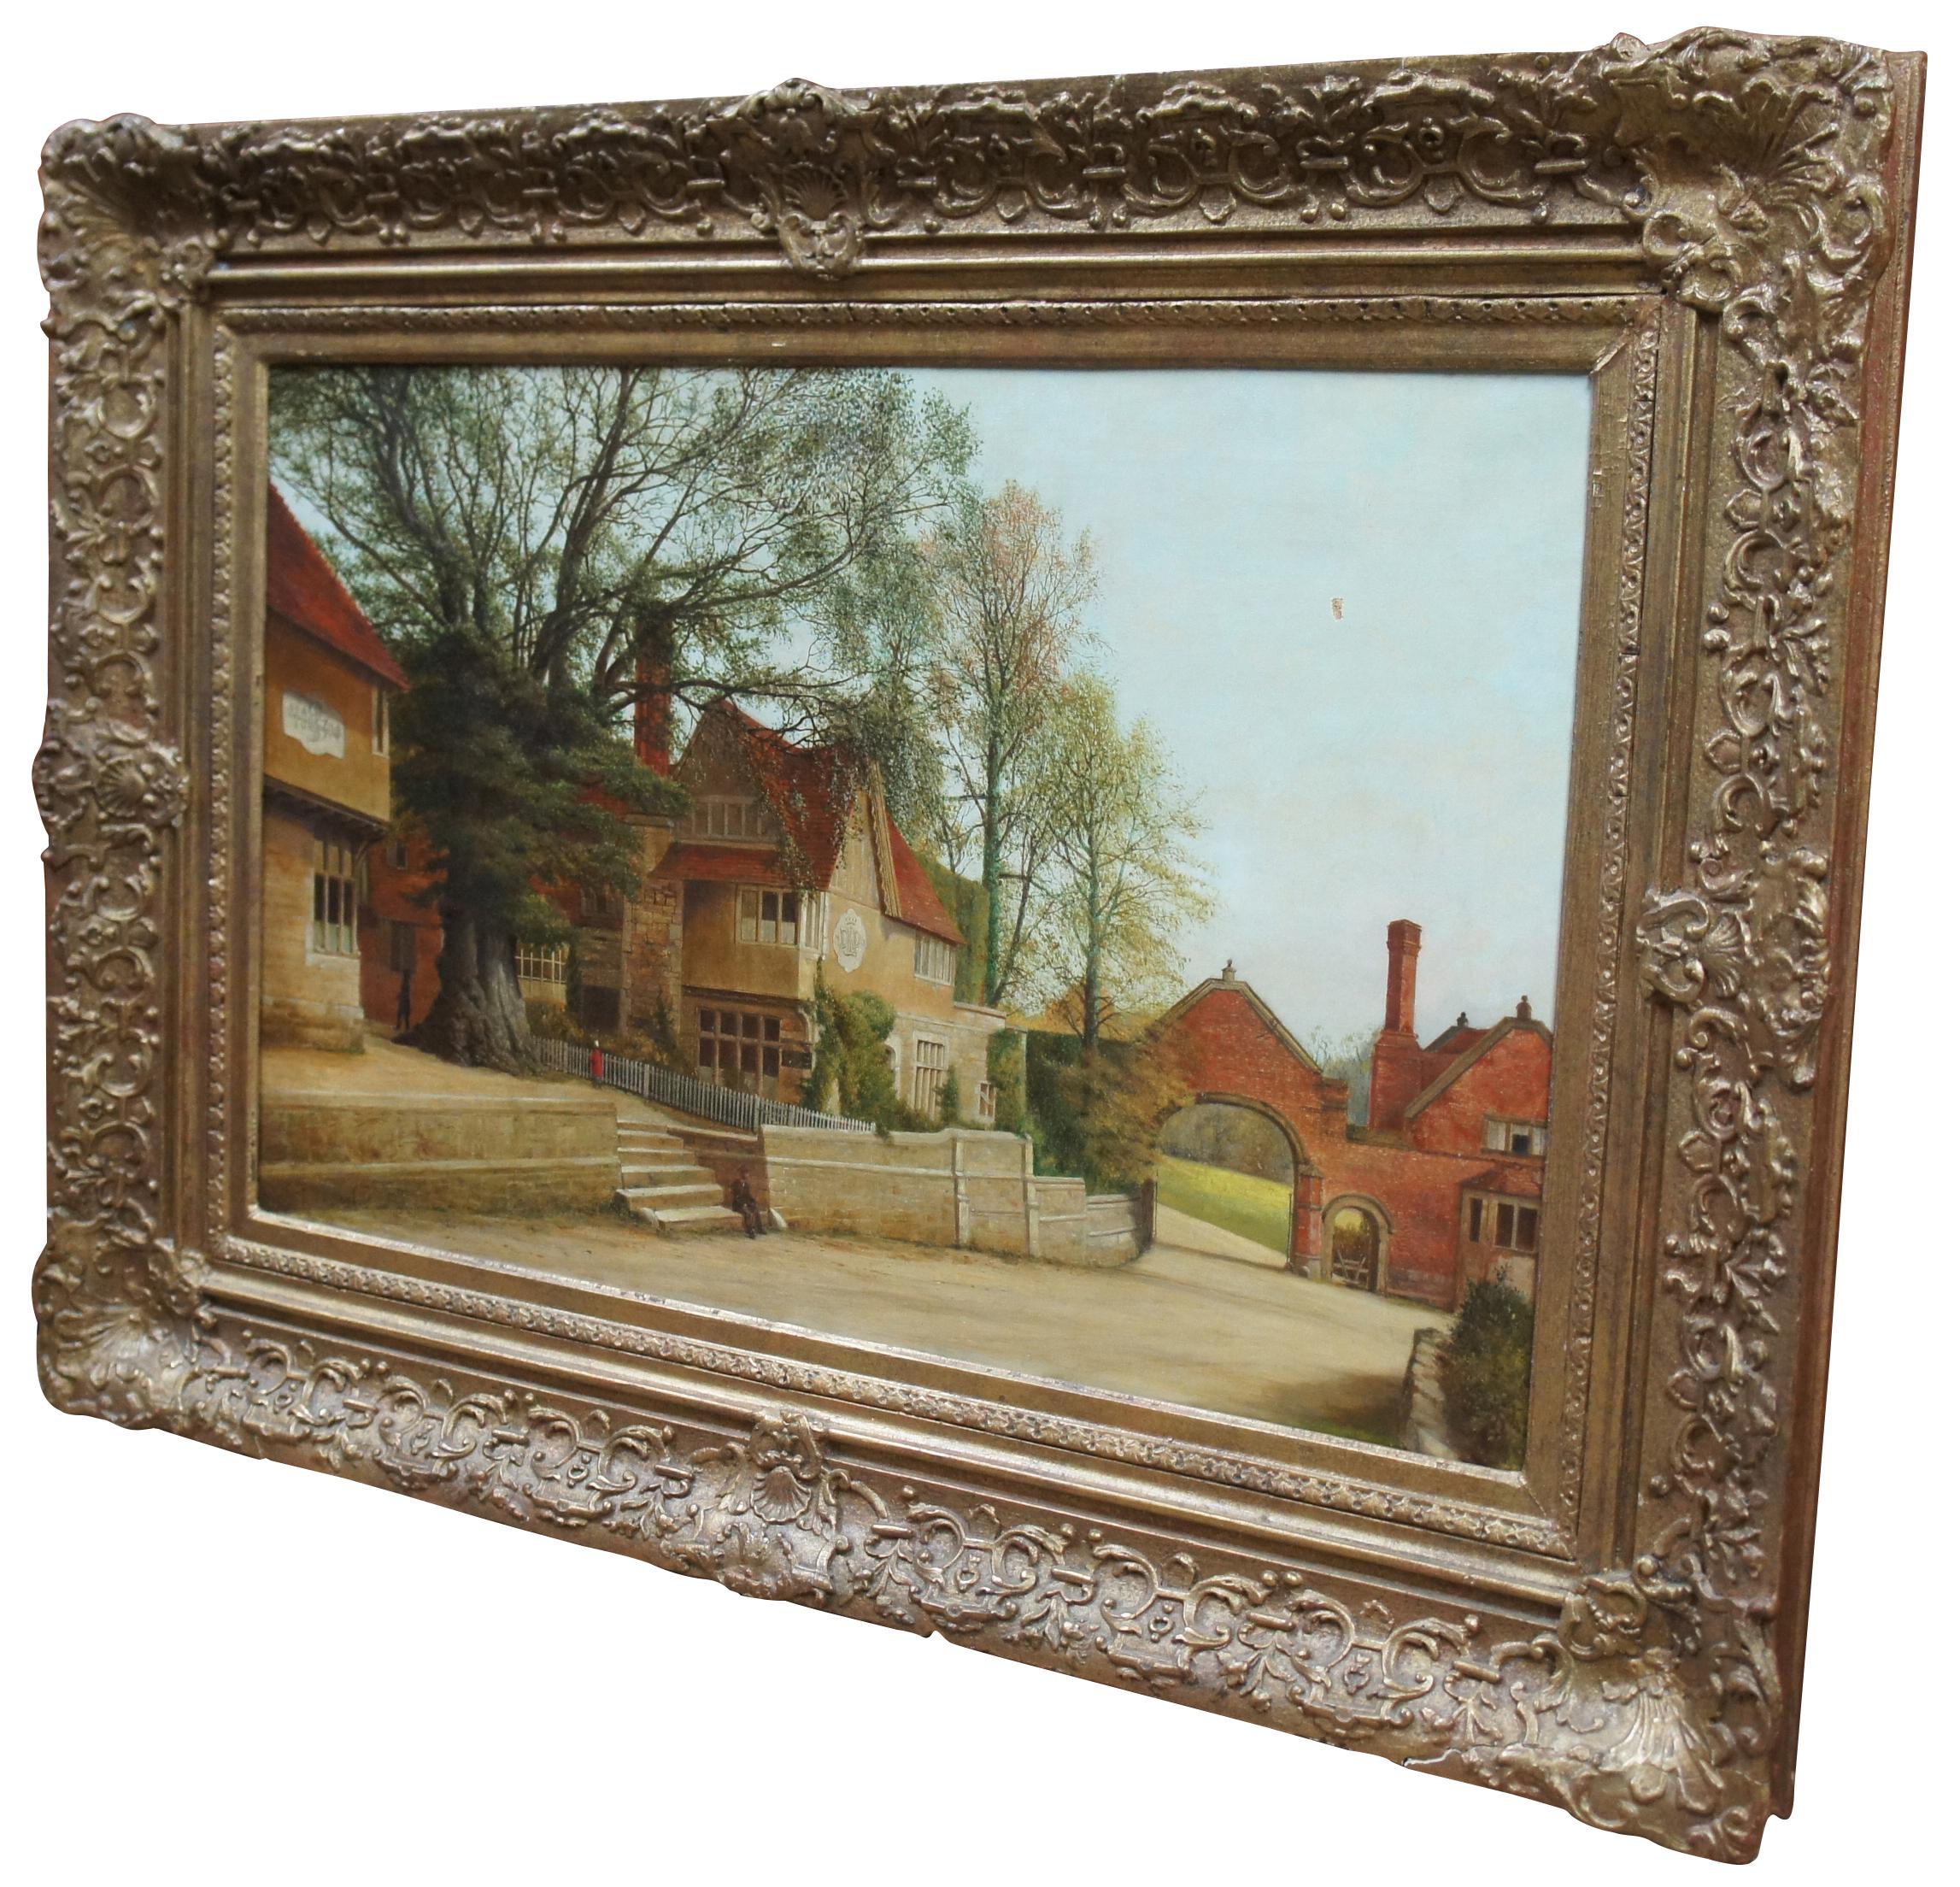 Antique 19th century oil on canvas painting of a village scene featuring a picturesque European street with a large tree and three figures. Measures: 35